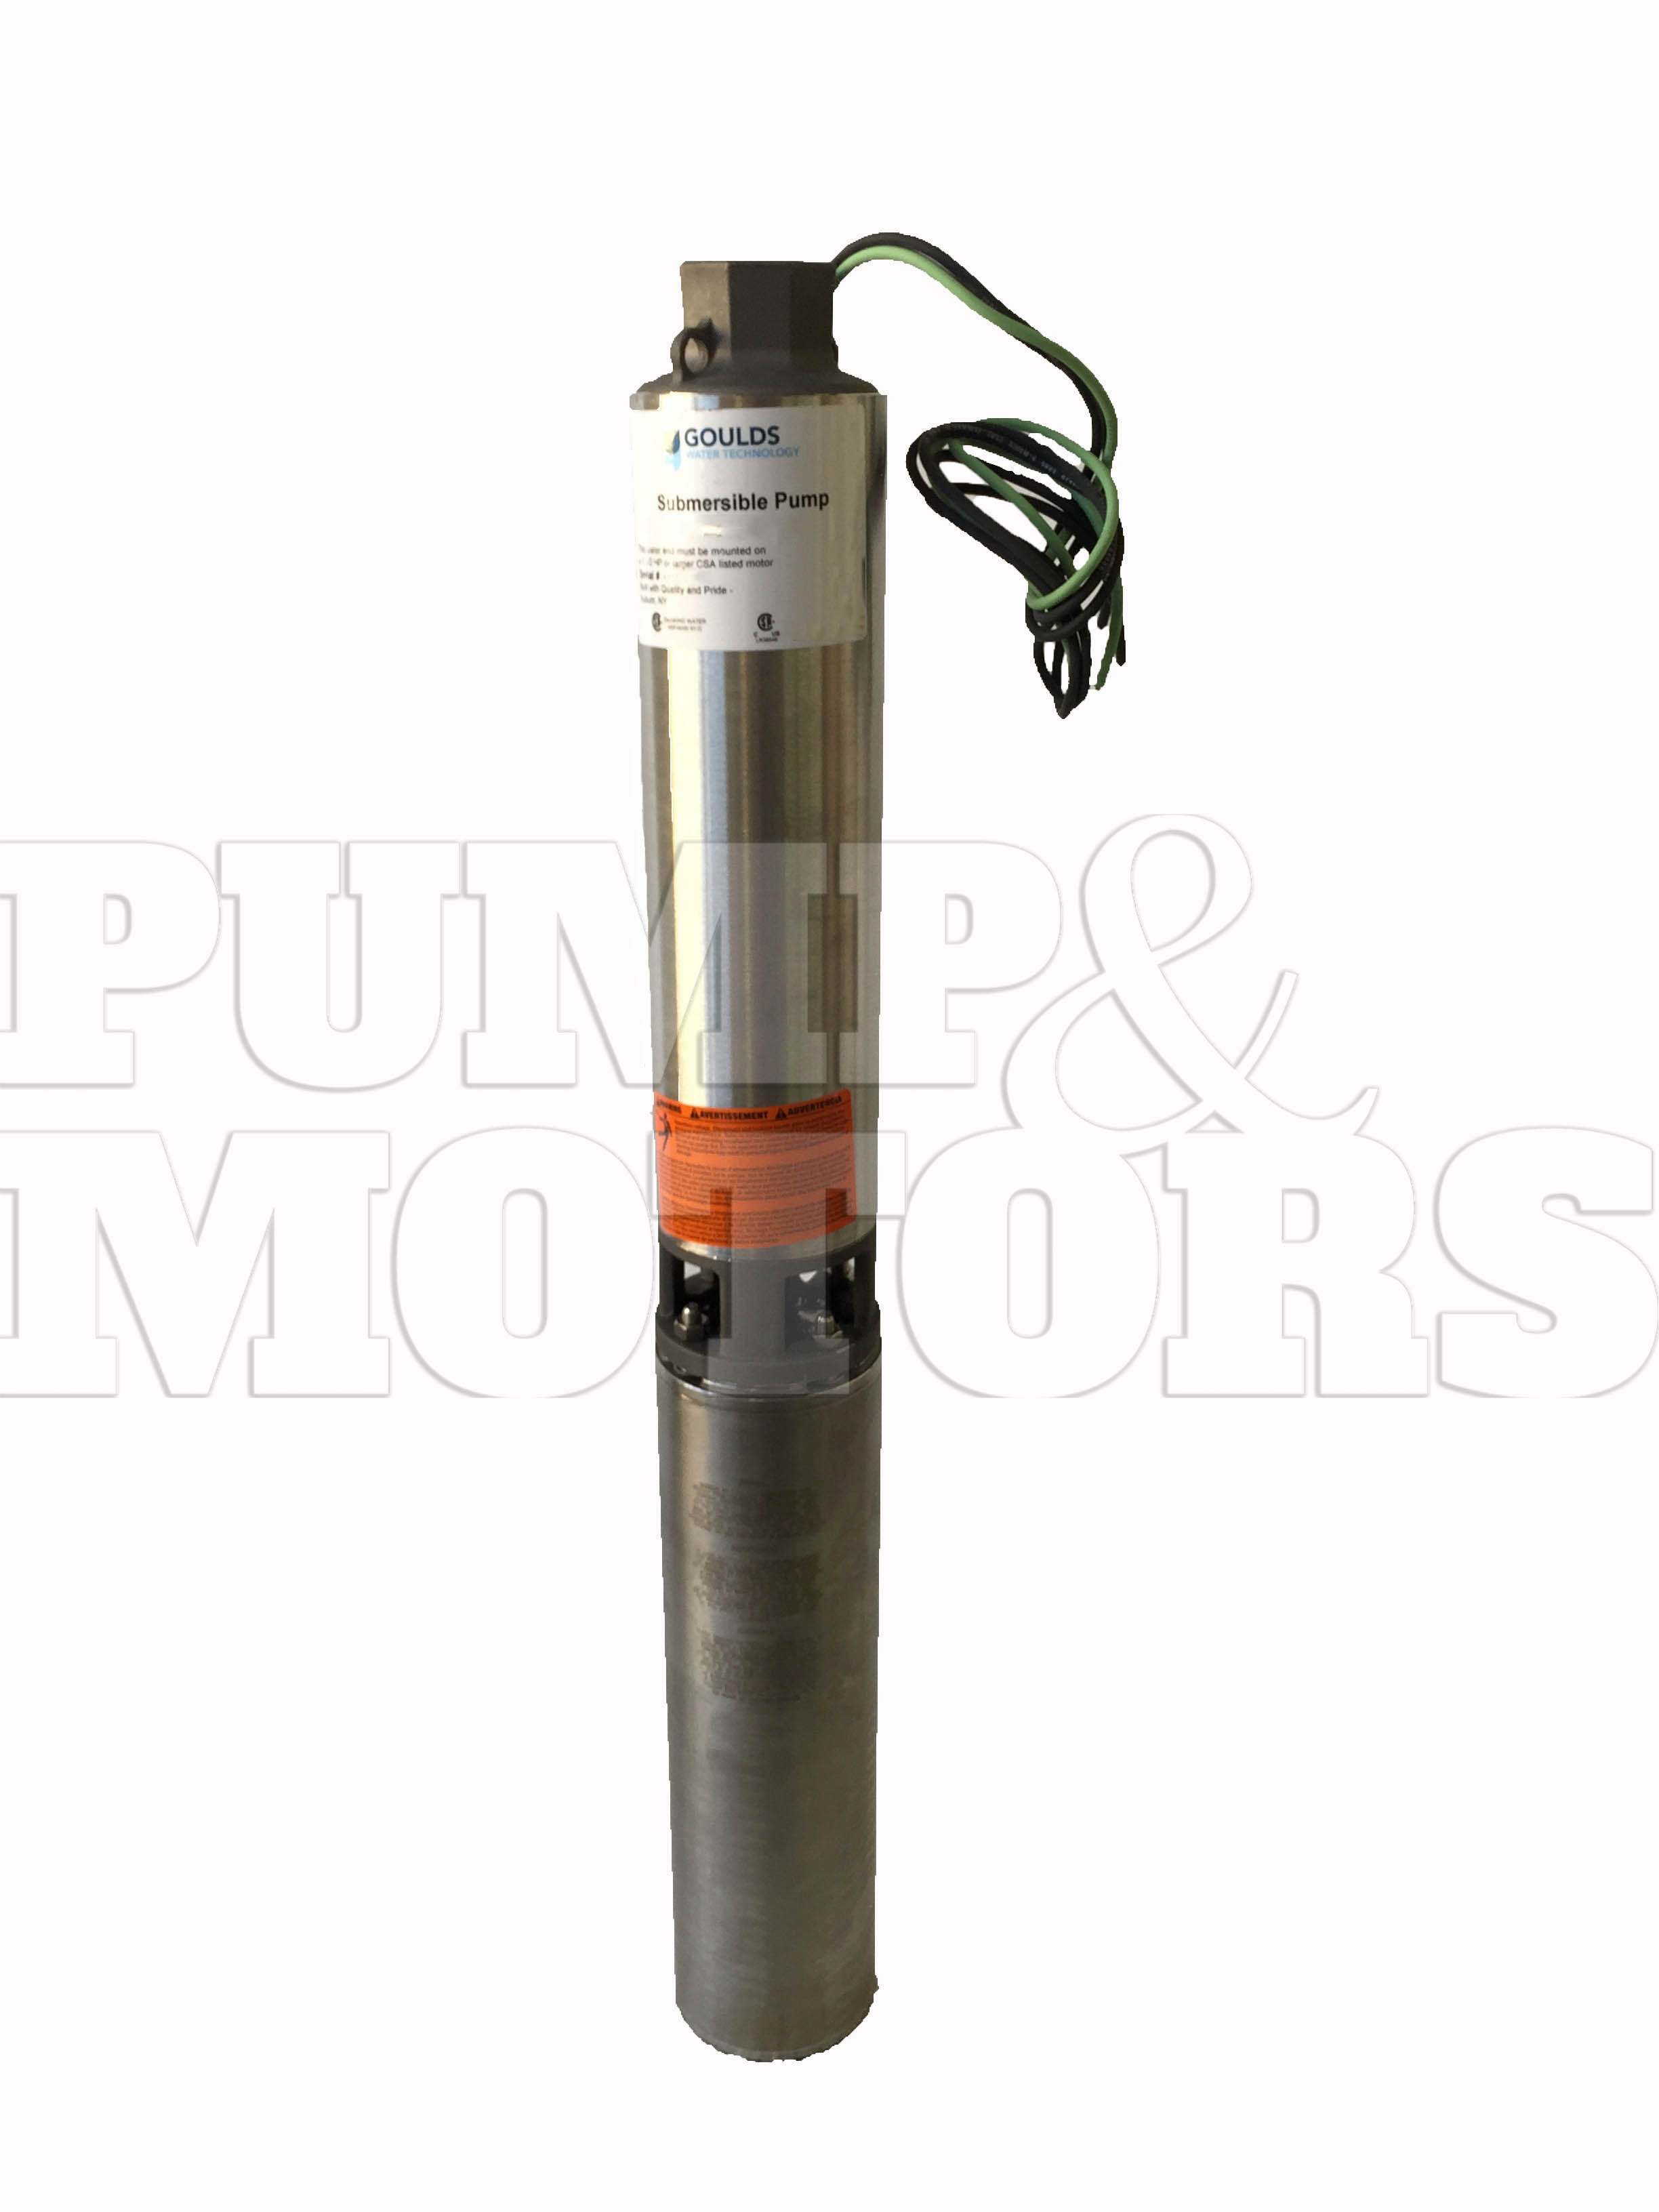 35GS10422C Goulds 35GPM Submersible Water Well Pump & Motor 1HP